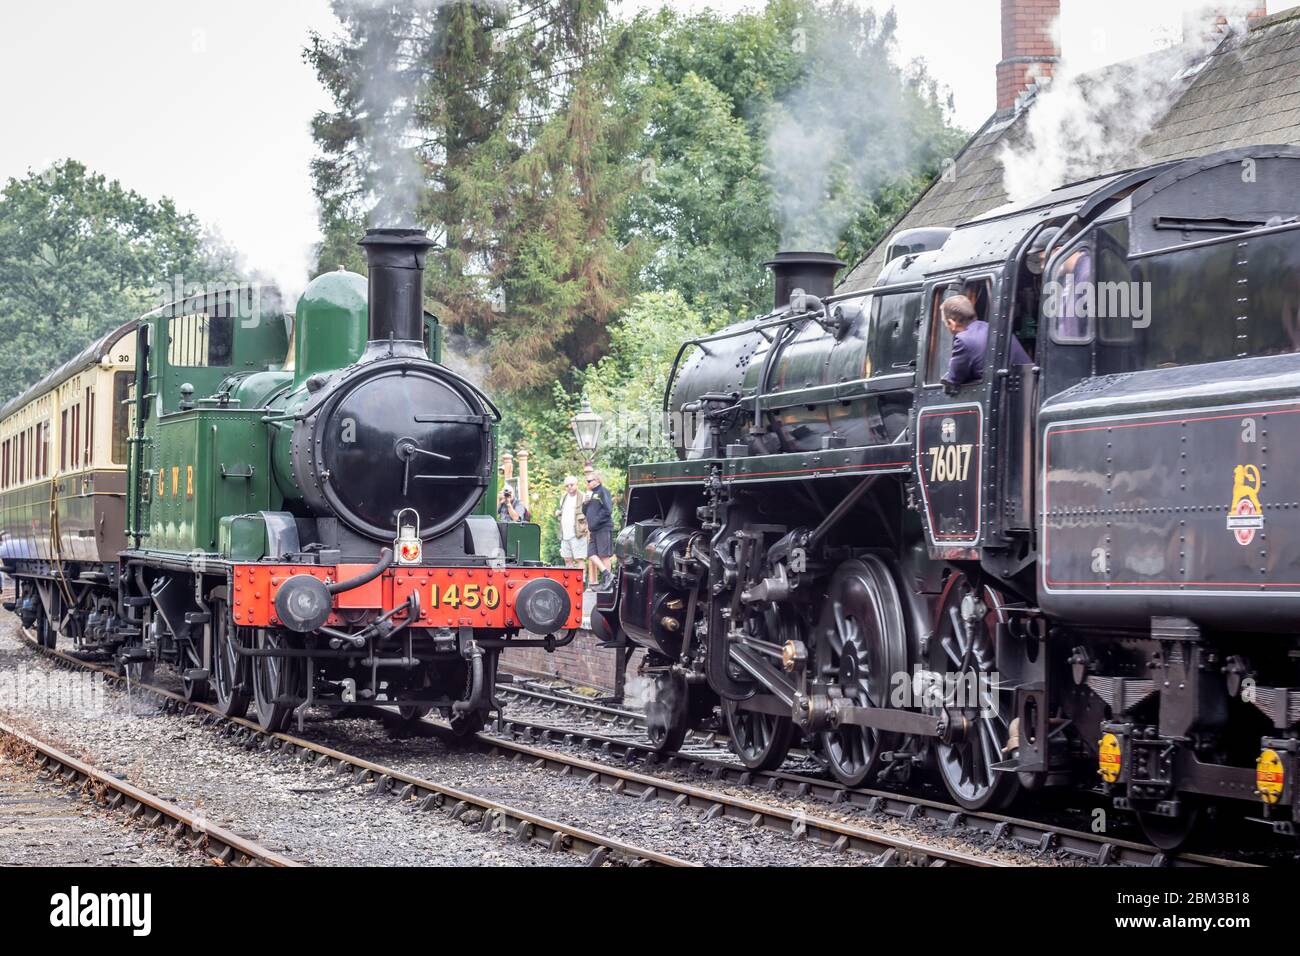 BR 2-6-0 '4MT' No. 76017 passes GWR 0-4-2T '14xx' No. 1450 at Highley on the Severn Valley Railway during their Autumn Steam Gala Stock Photo